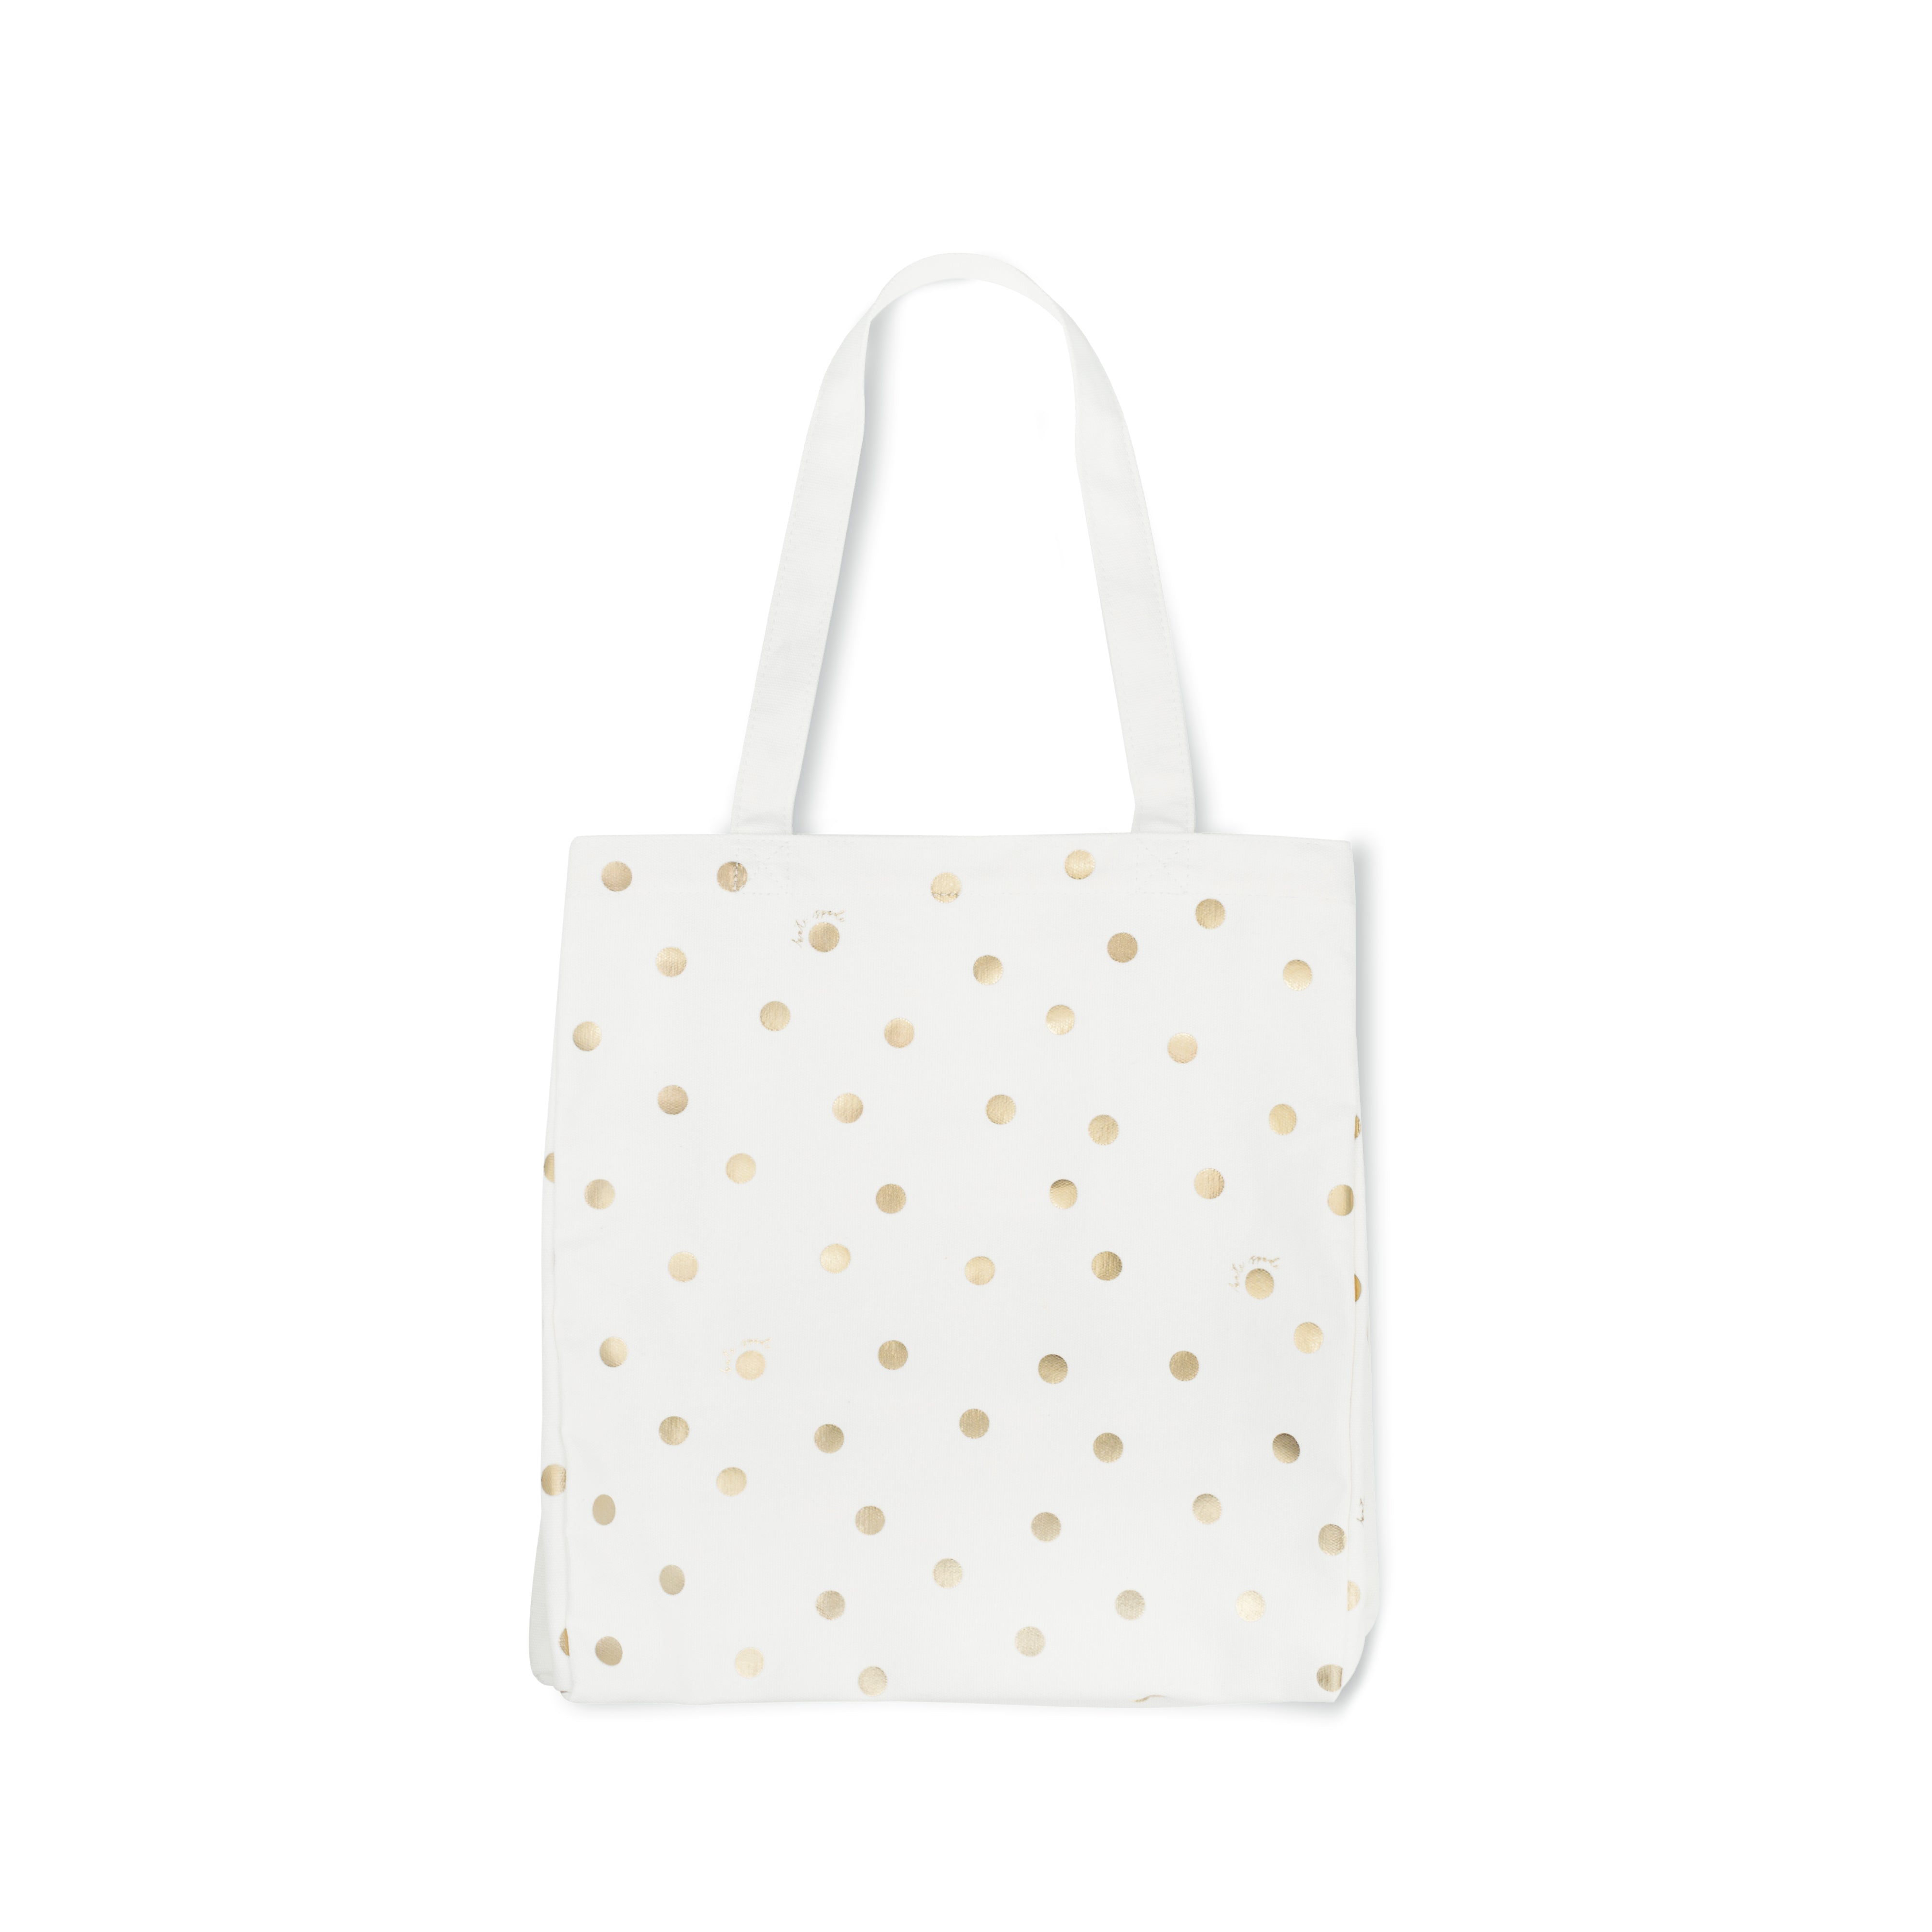 What if You Could Name Your Own Price on Designer Bags Like This Kate Spade  Tote?